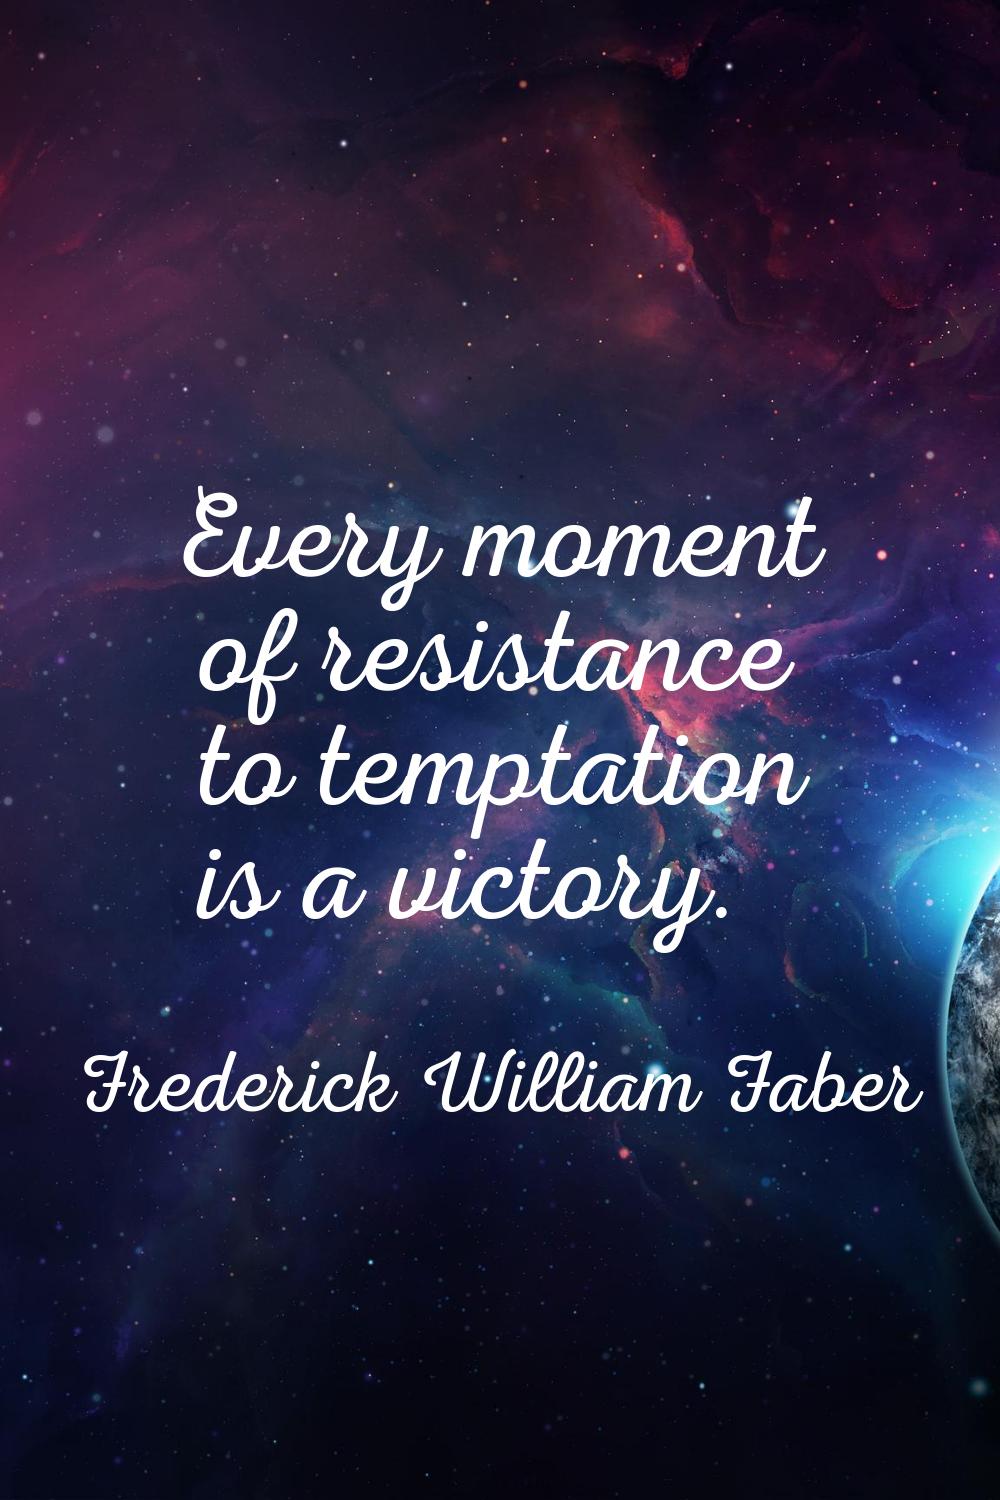 Every moment of resistance to temptation is a victory.